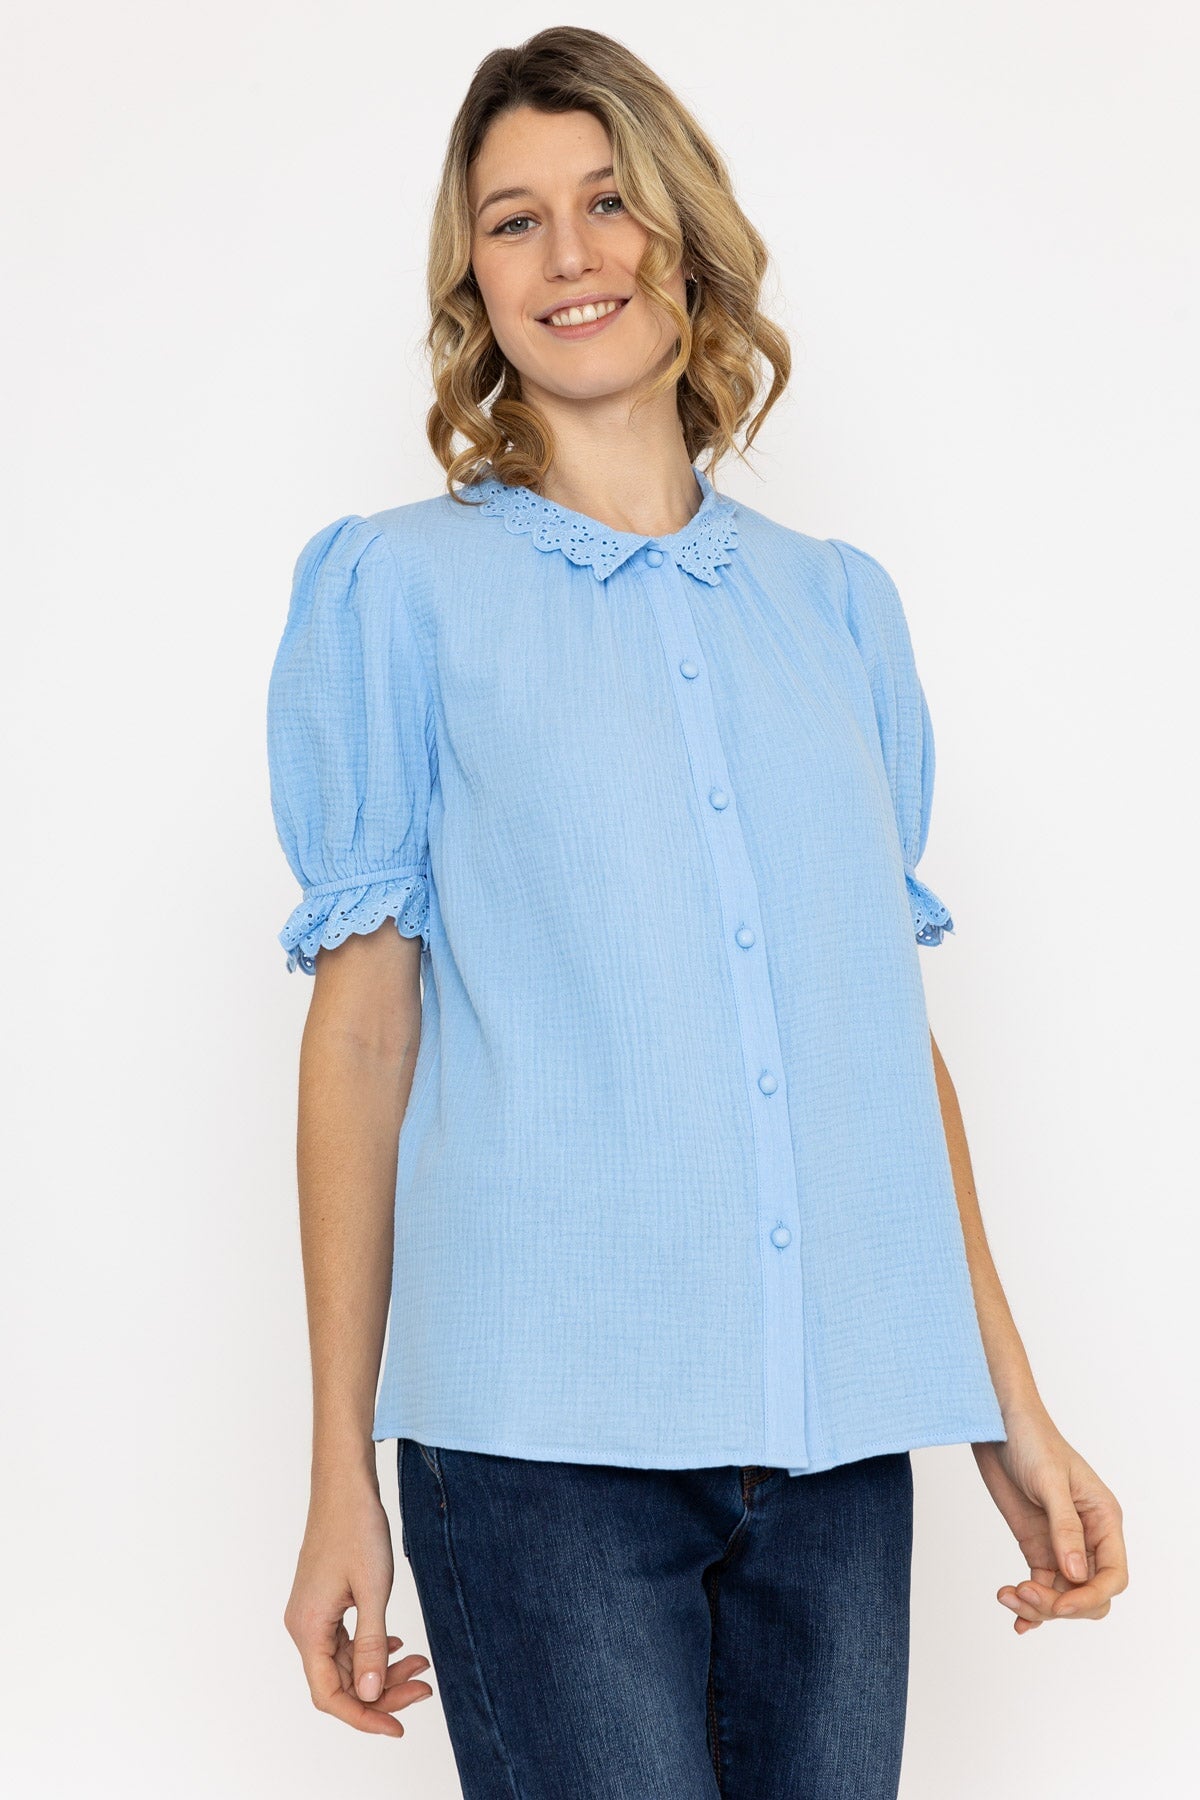 Air Flow Blouse in Blue